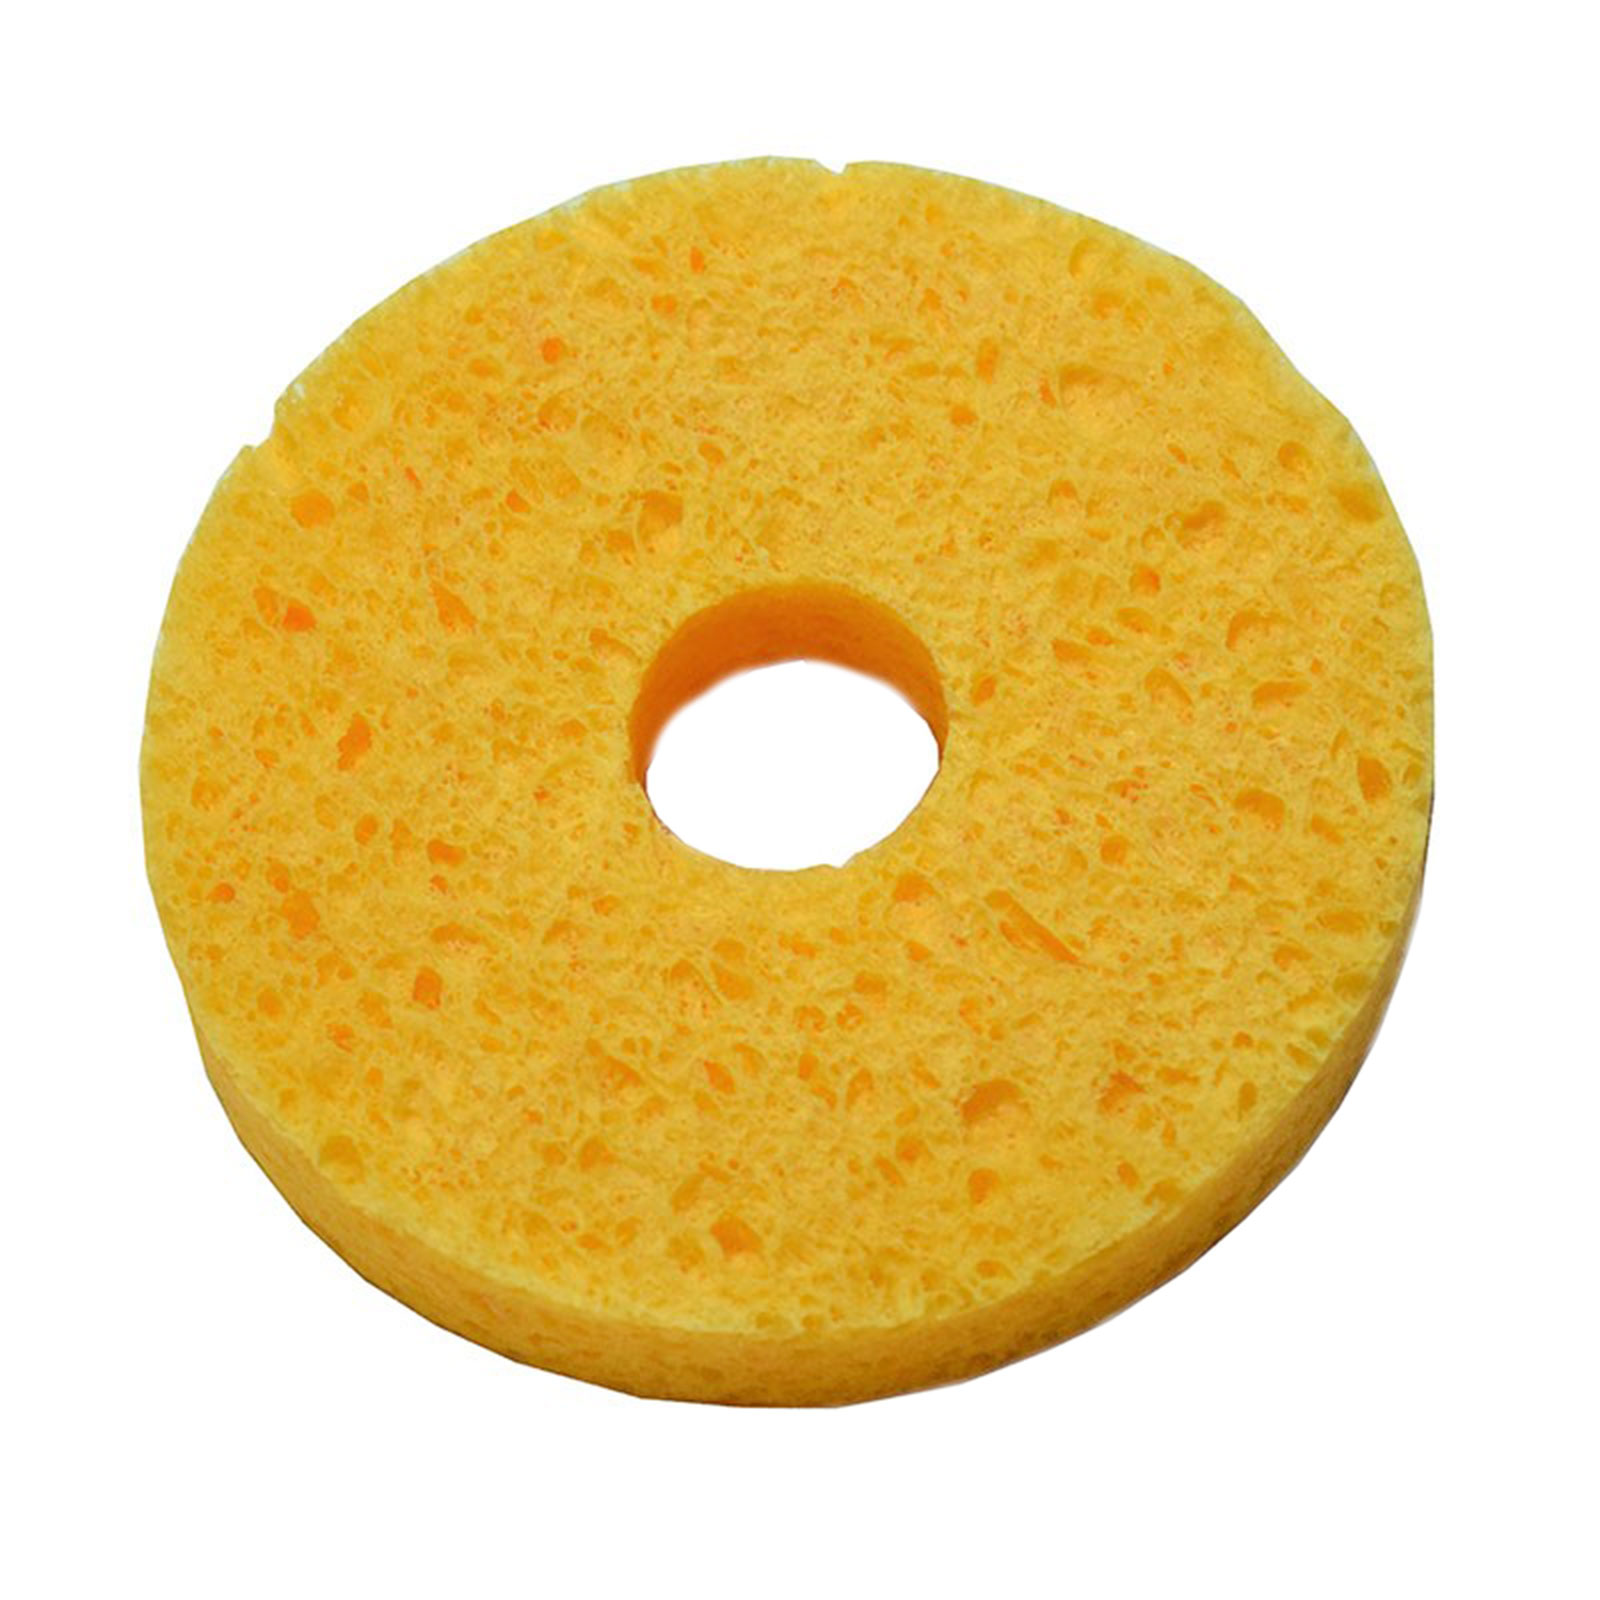 Single Center Hole Solder Sponge For Use With Soldering Irons, Workstands